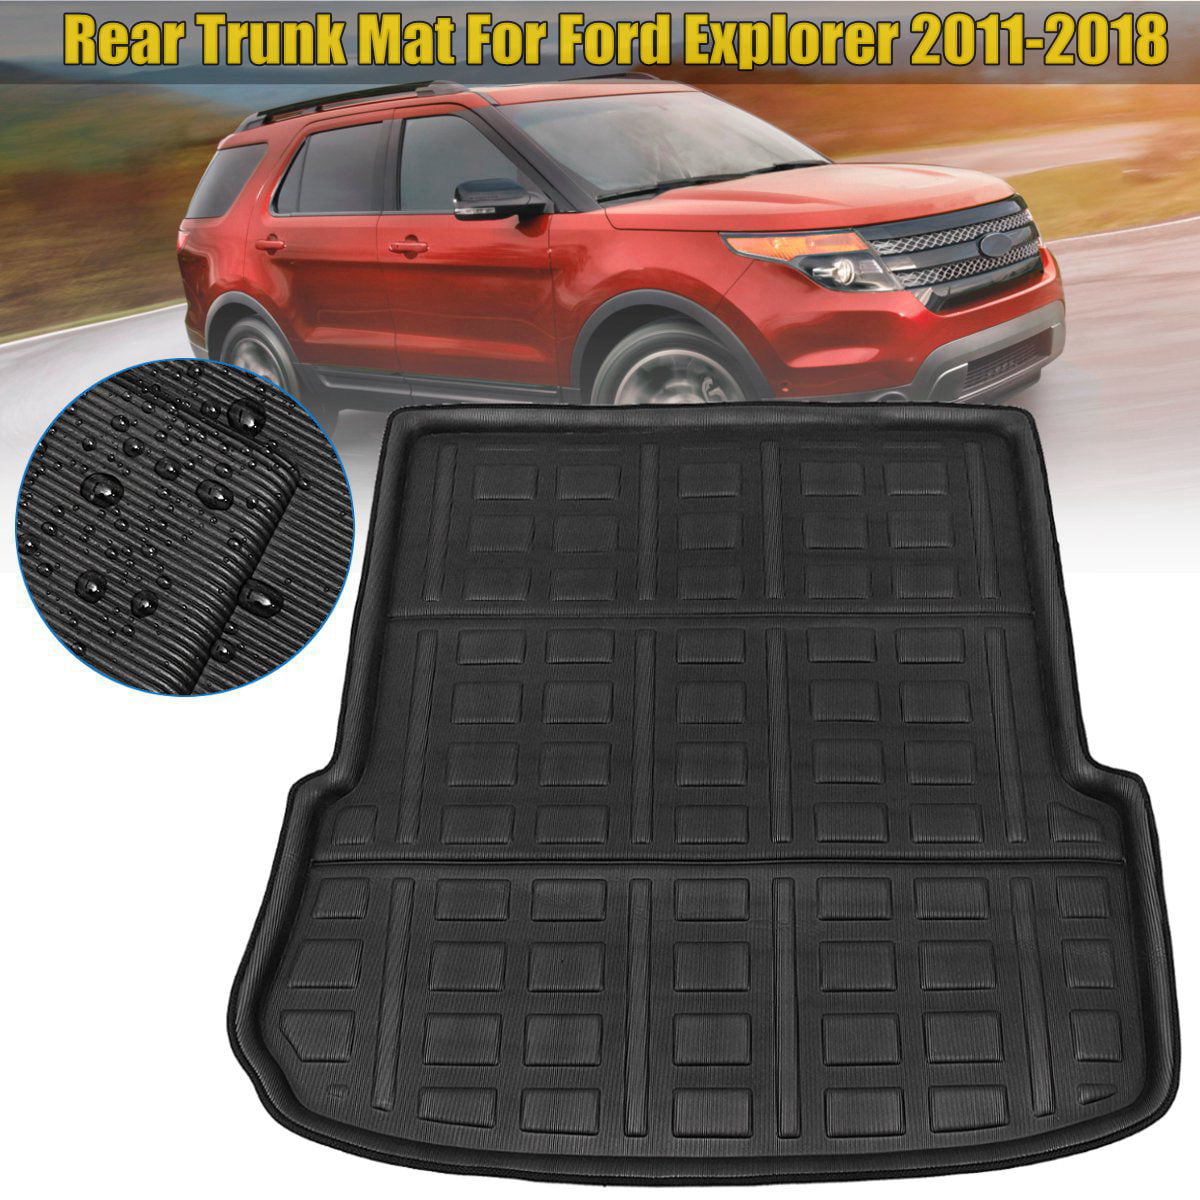 Only Fits 6 Passenger Models MotorFansClub Floor Mats Liners Fit for Compatible with Ford Explorer 2020 2021 Cargo Carpet All Weather Protector Front Rear Mats TPE Black 